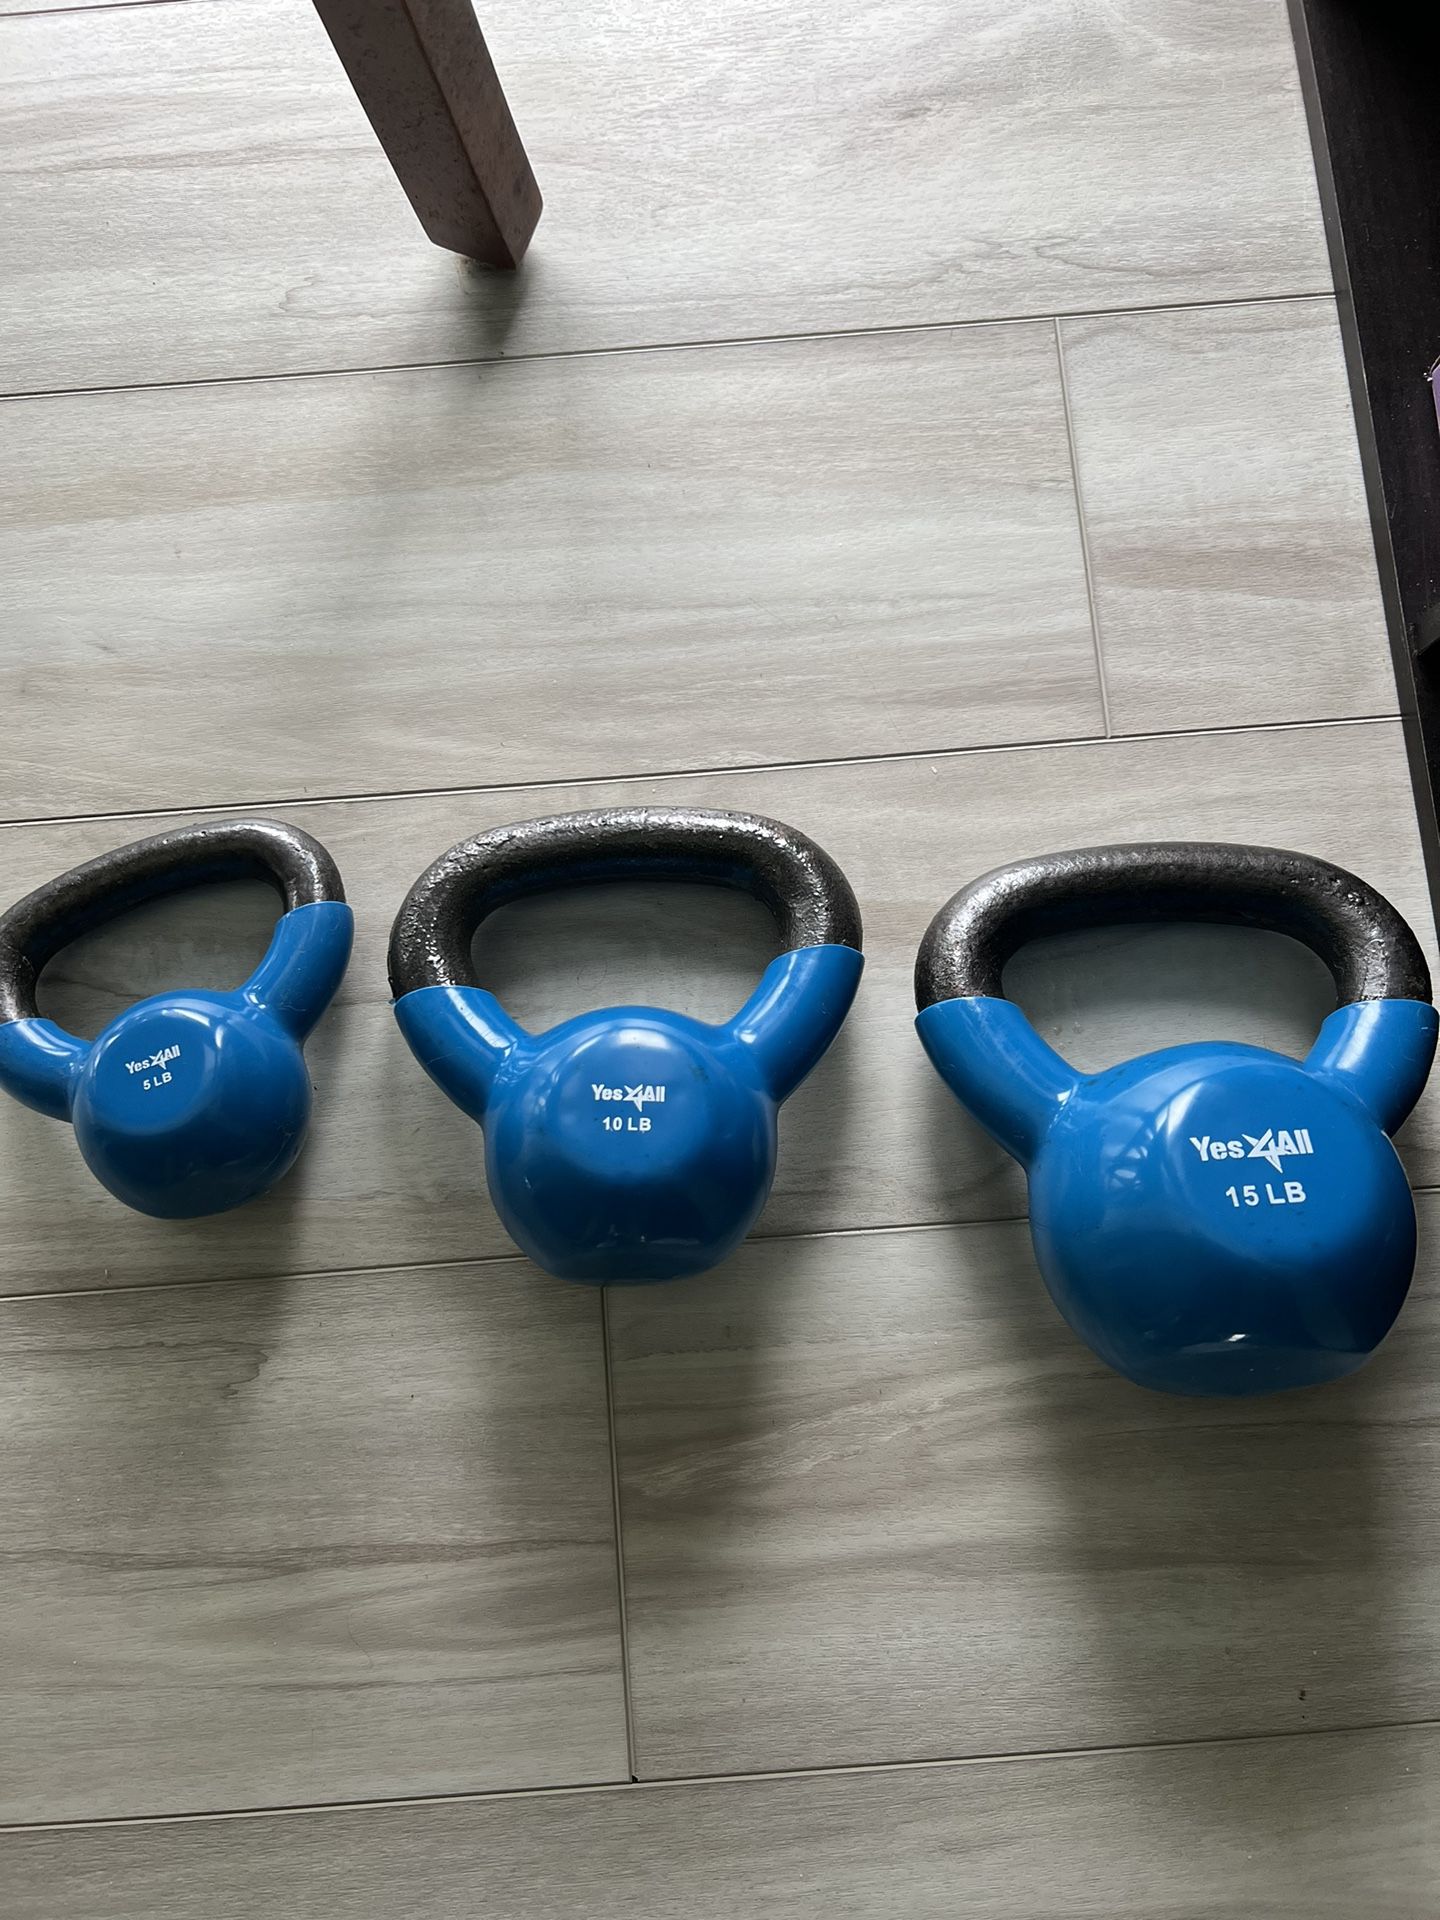 Kettle Bell Weights 3 Sizes See Description 